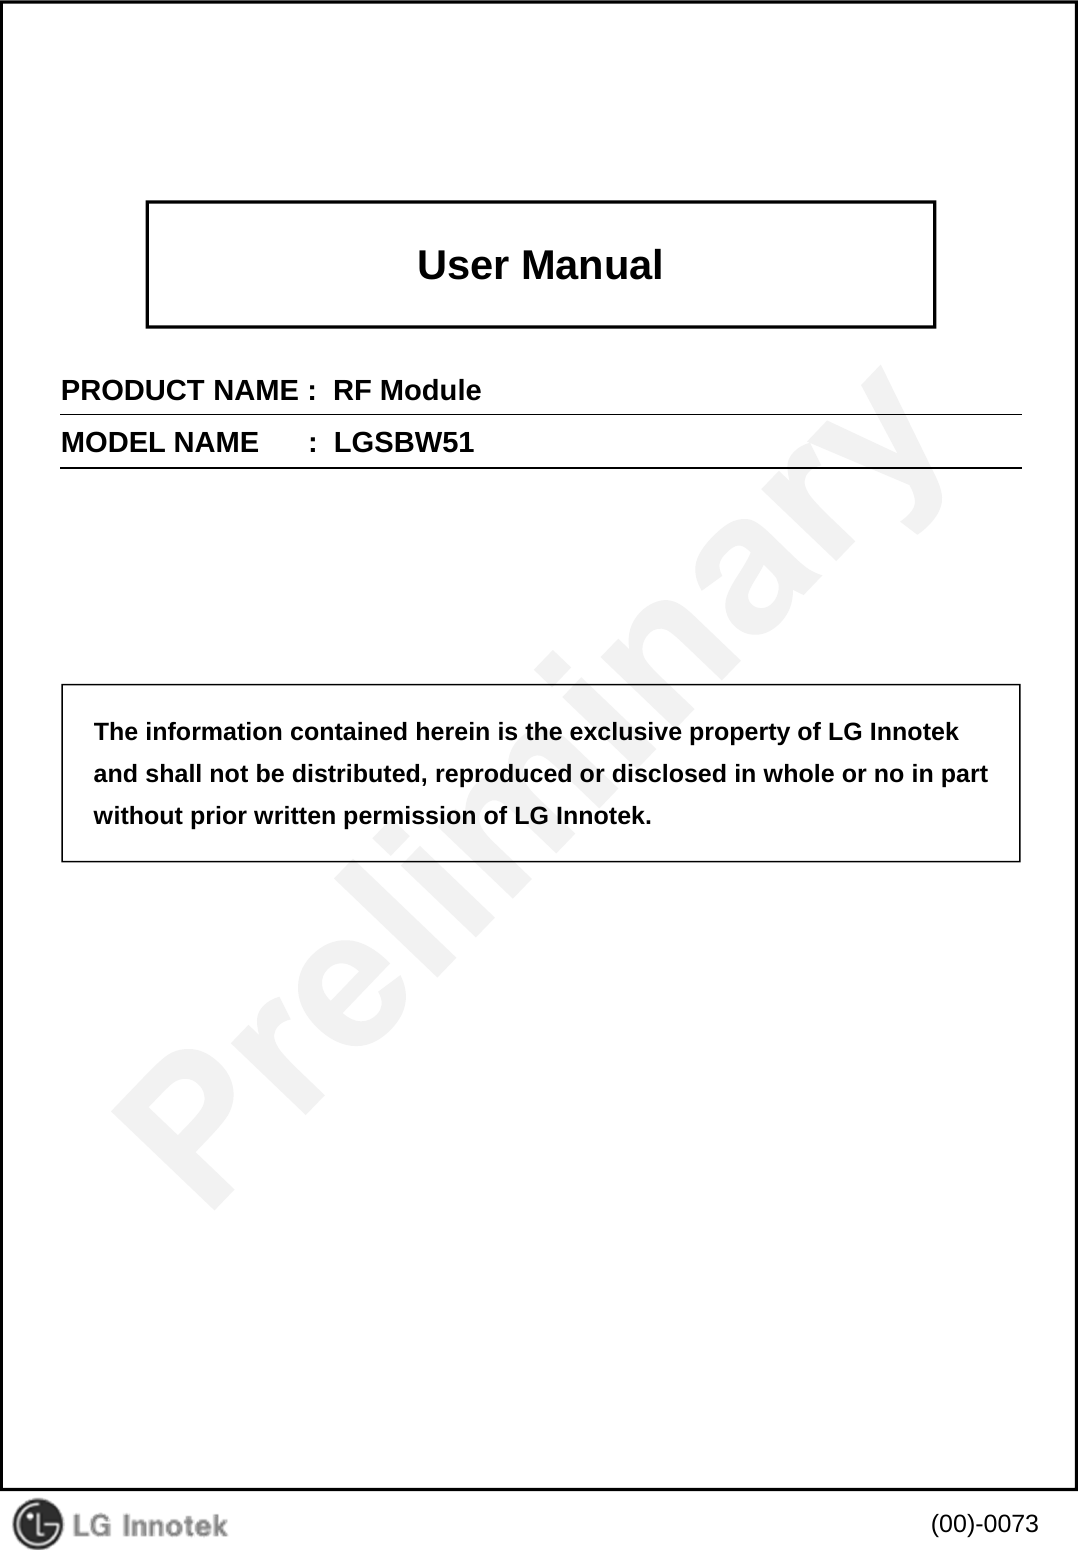 User ManualPRODUCT NAME :  RF ModuleMODEL NAME      :  LGSBW51(00)-0073The information contained herein is the exclusive property of LG Innotekand shall not be distributed, reproduced or disclosed in whole or no in partwithout prior written permission of LG Innotek.